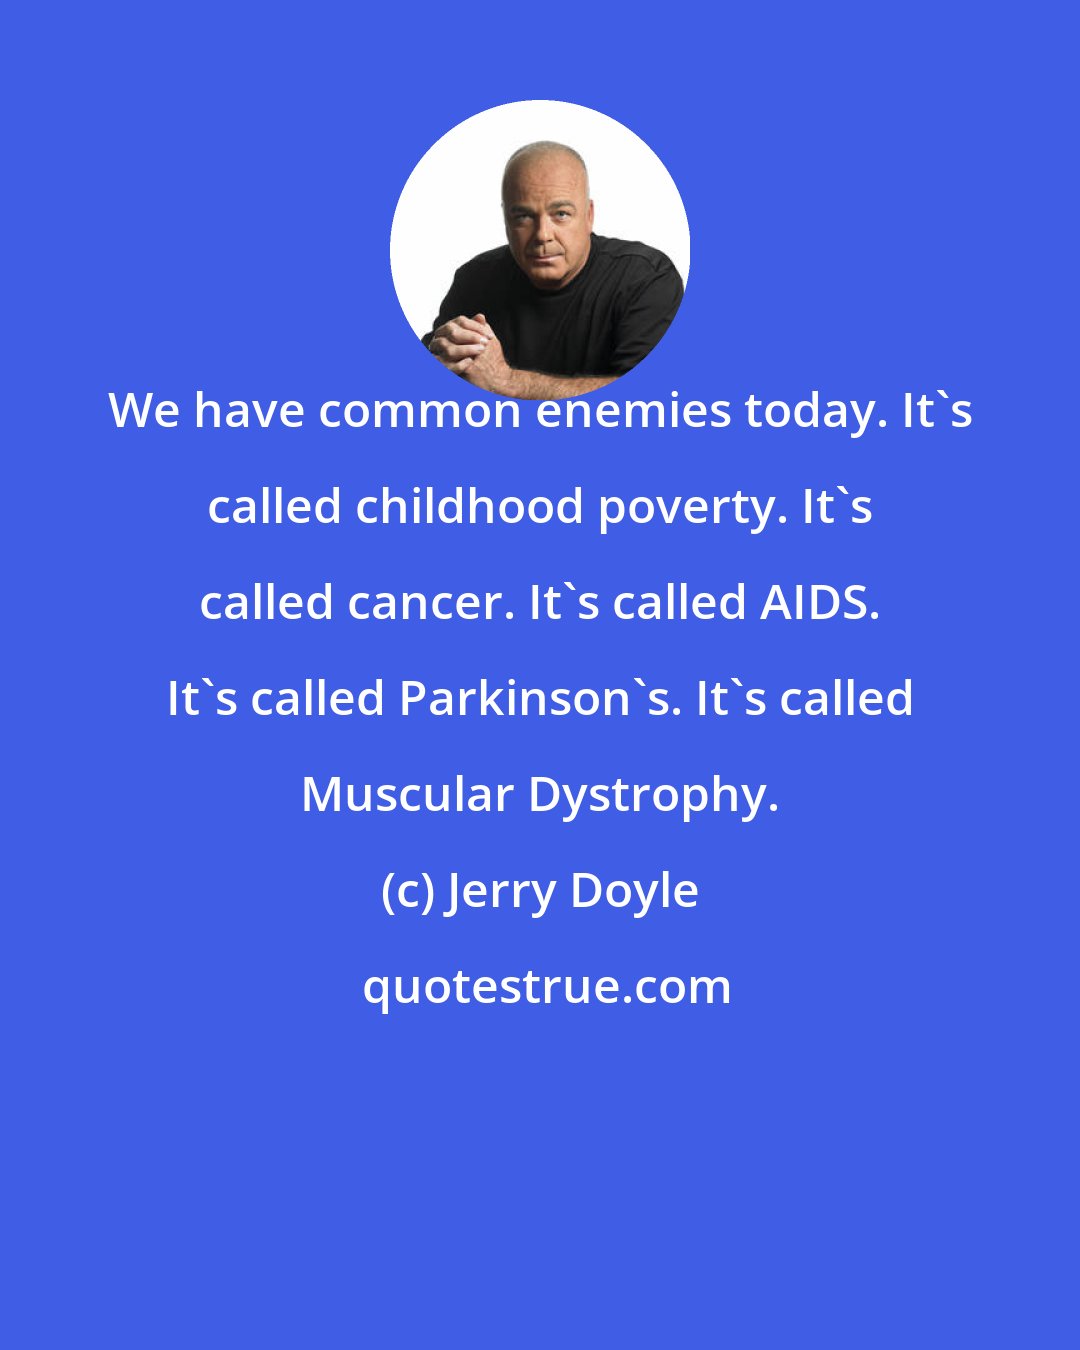 Jerry Doyle: We have common enemies today. It's called childhood poverty. It's called cancer. It's called AIDS. It's called Parkinson's. It's called Muscular Dystrophy.